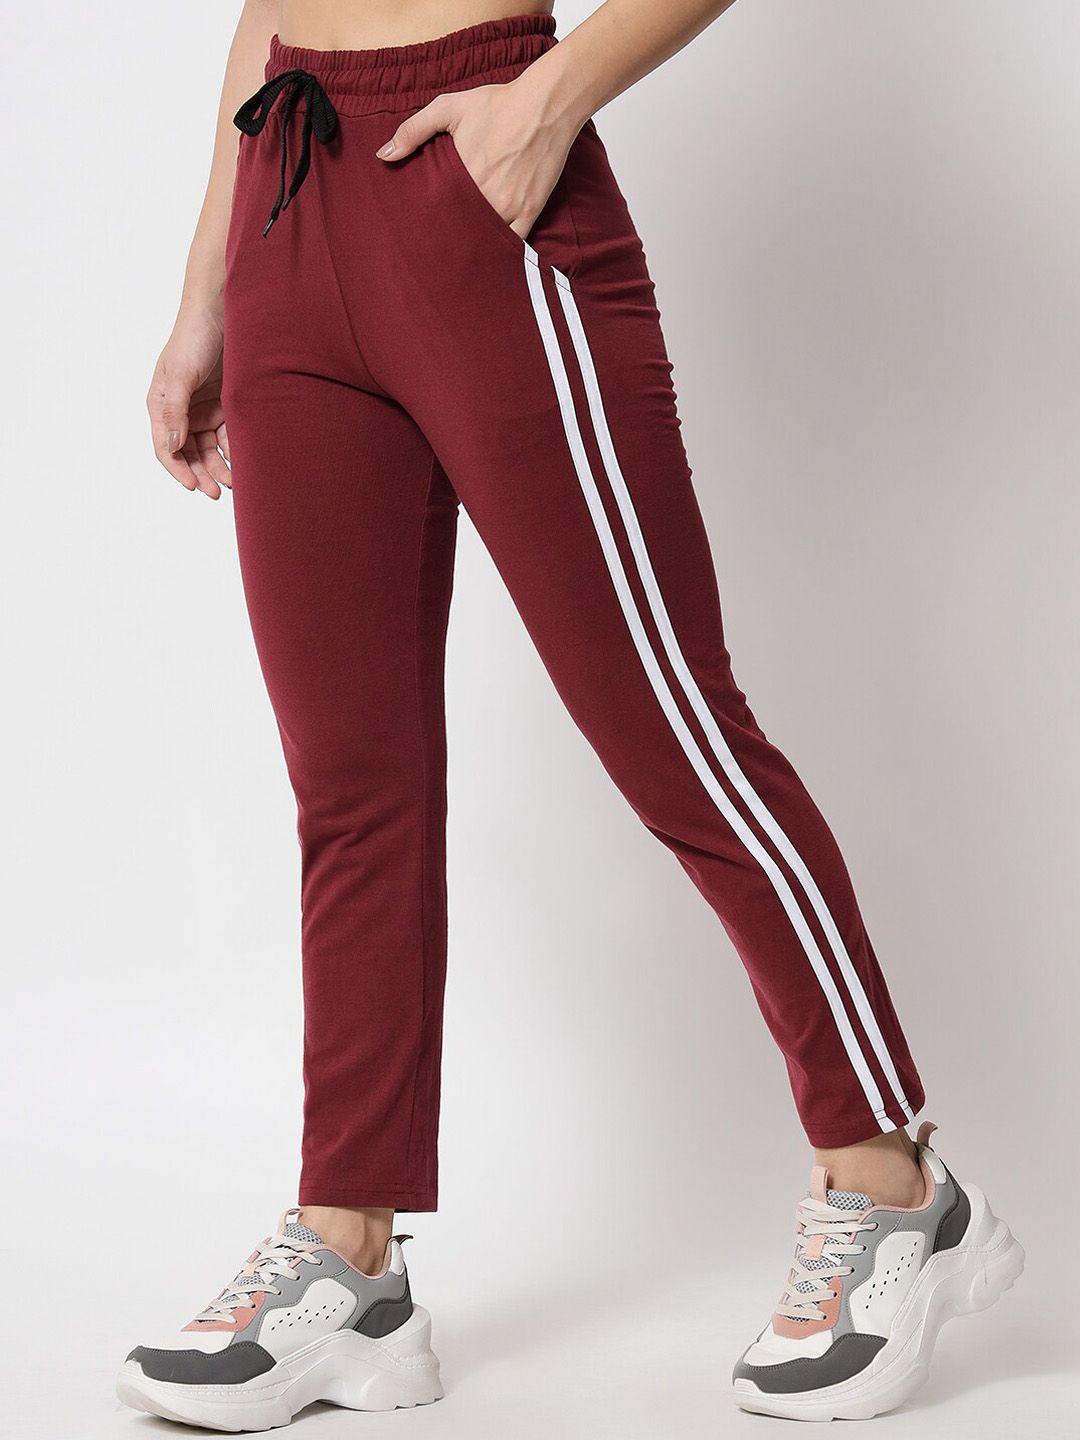 q-rious women maroon solid cotton track pants